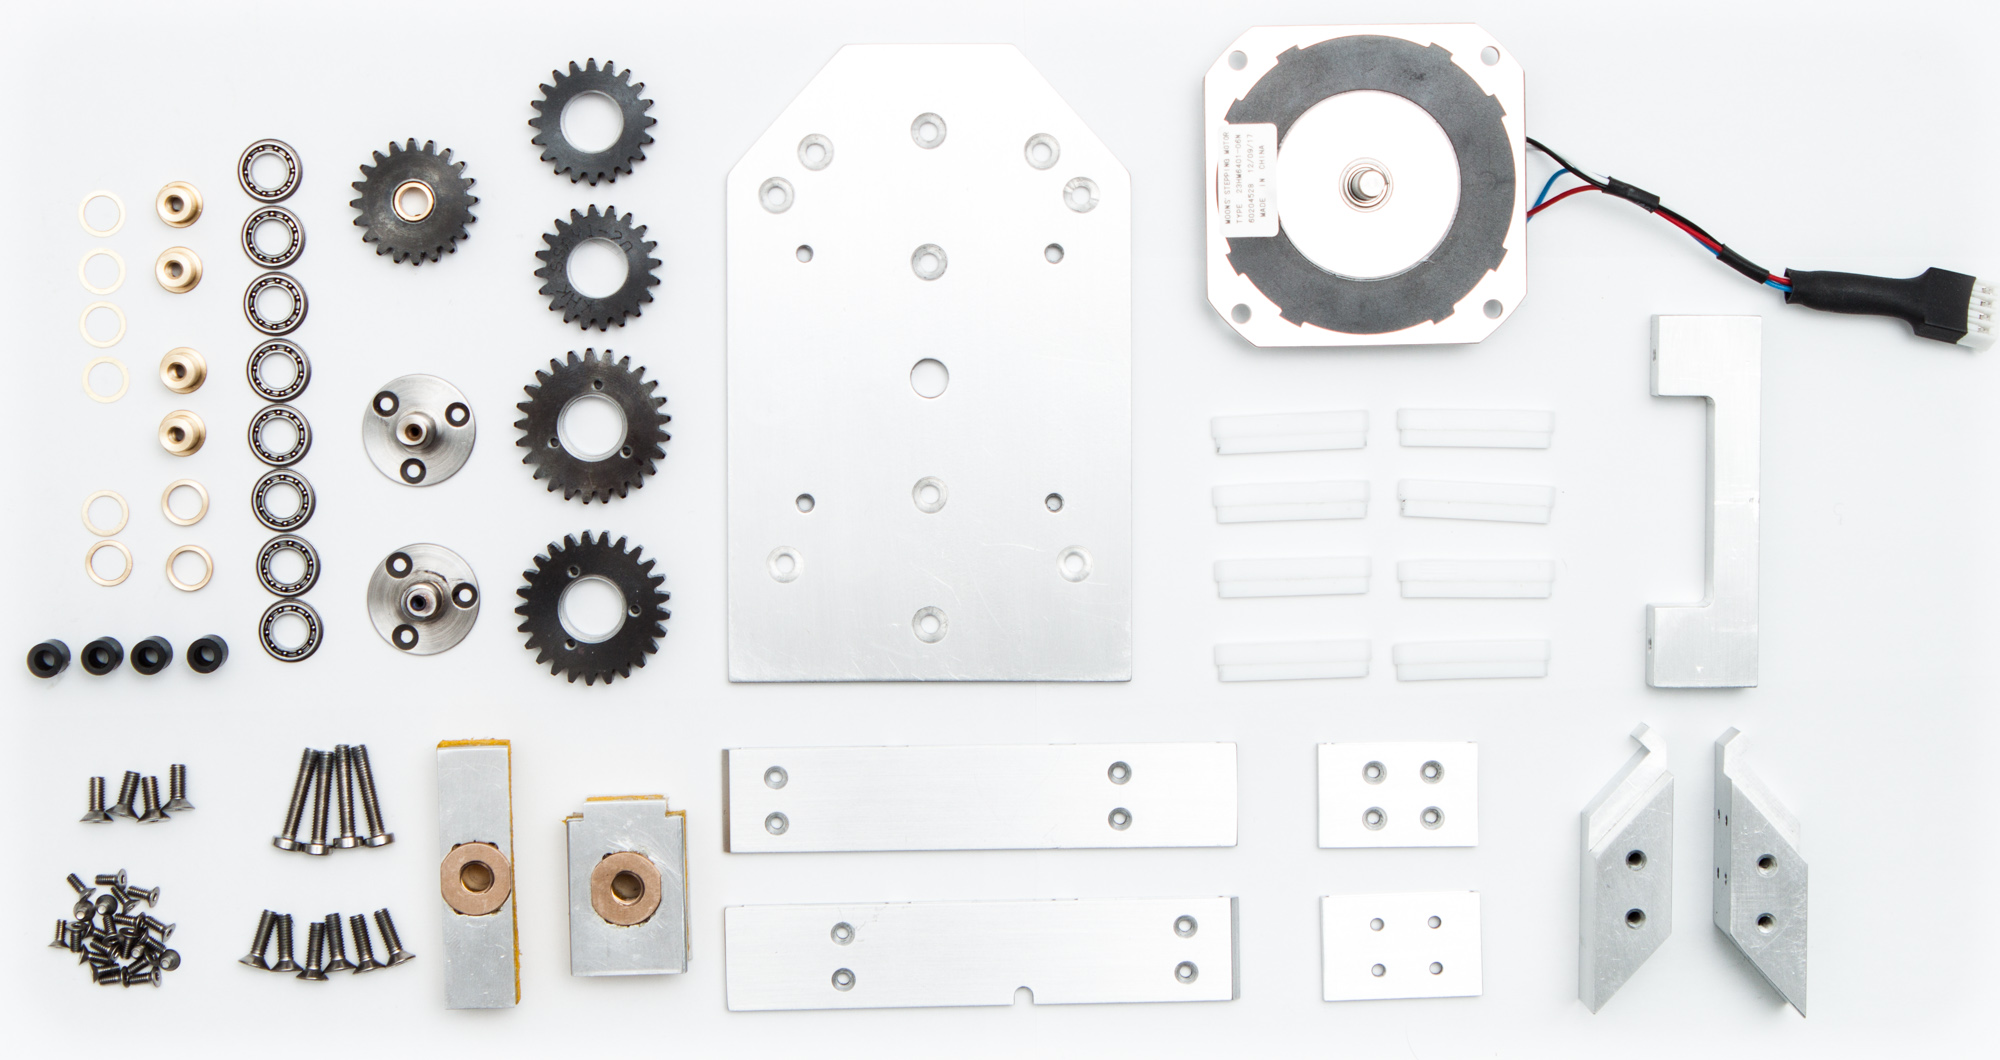 All the machined components and hardware